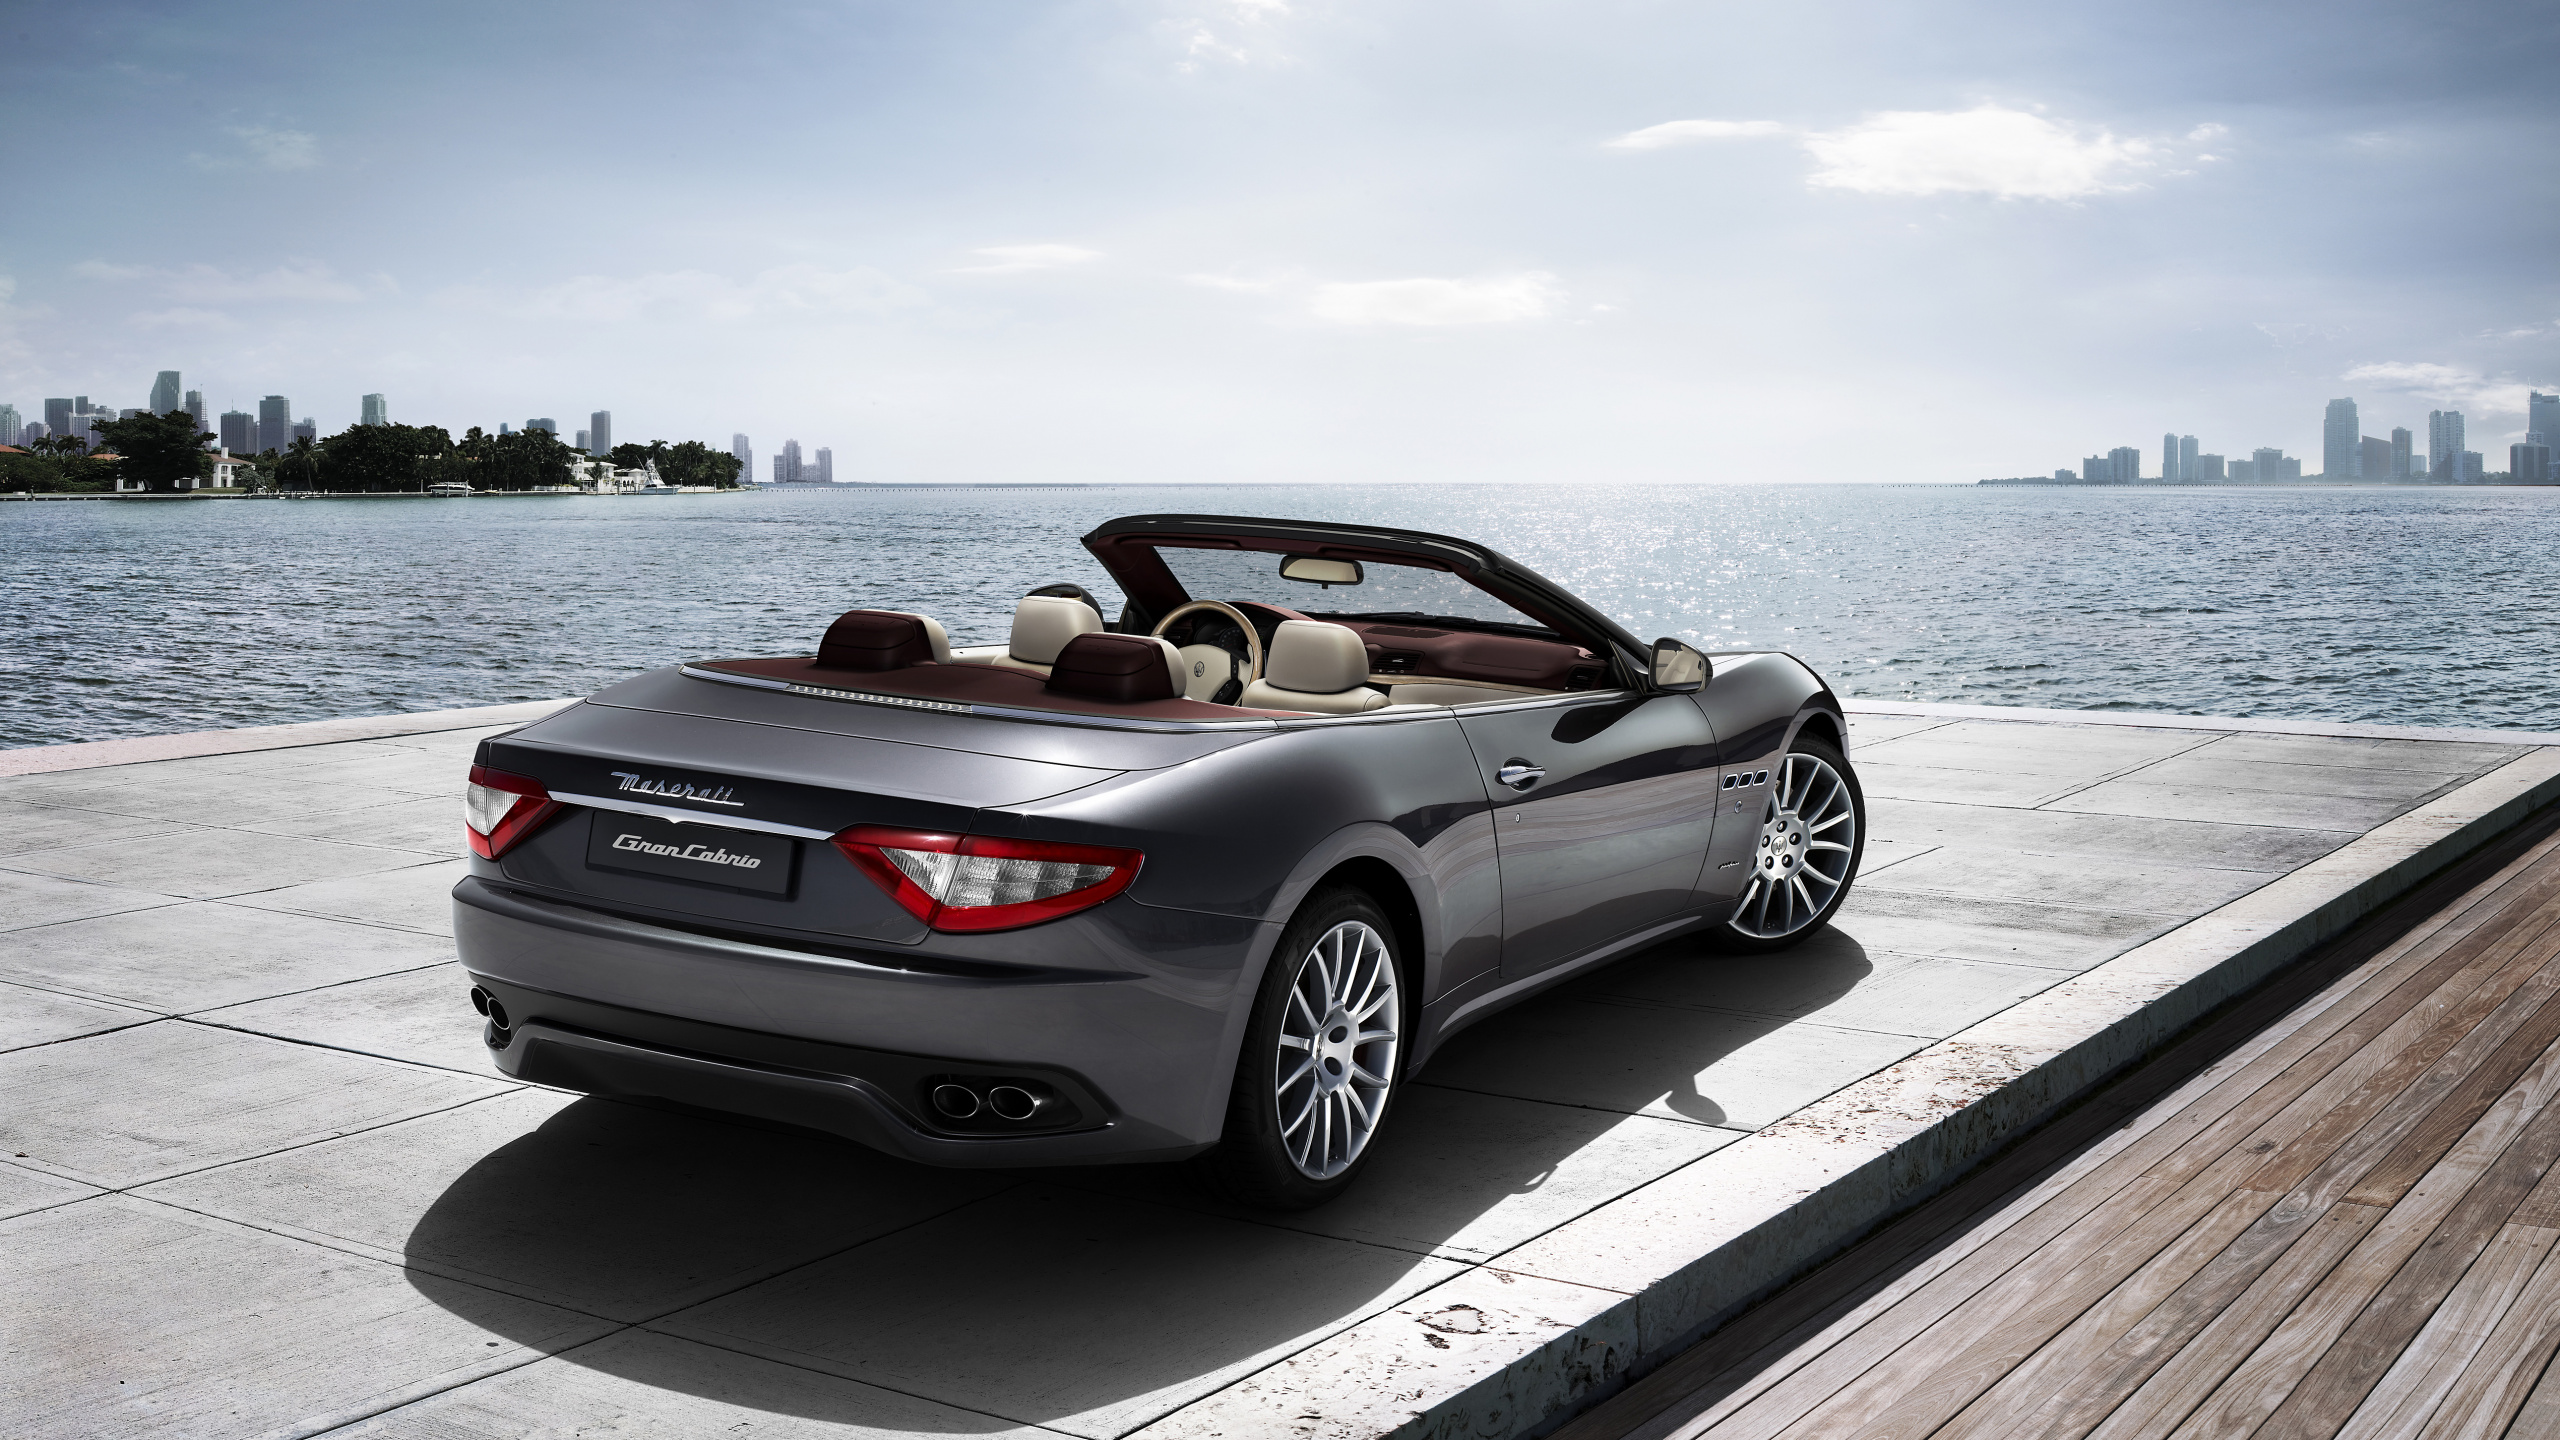 Silver Mercedes Benz Convertible Coupe Parked on Dock During Daytime. Wallpaper in 2560x1440 Resolution